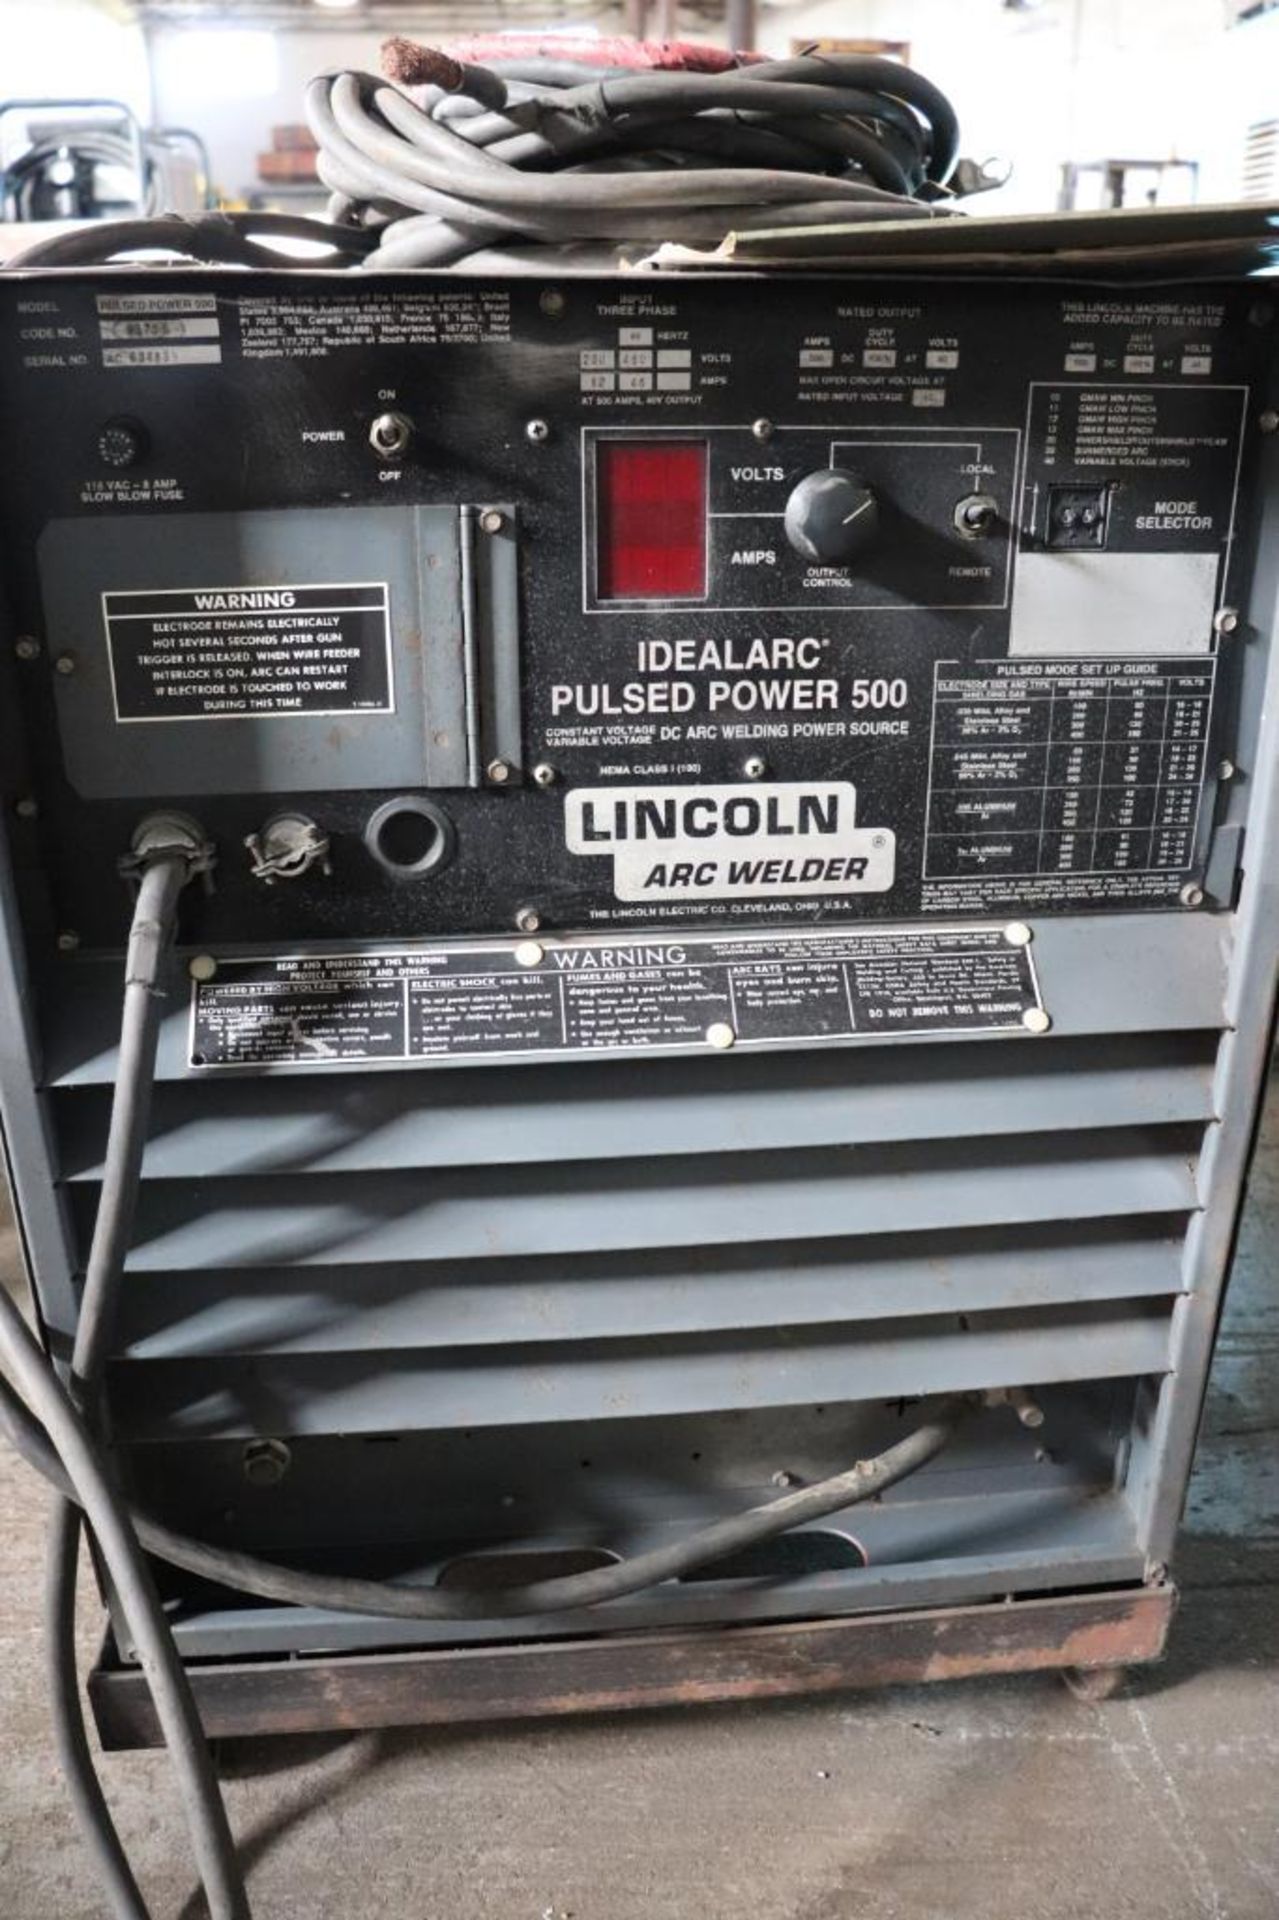 Lincoln Idealarc Pulsed power 500 DC Arc Welder - Image 4 of 12